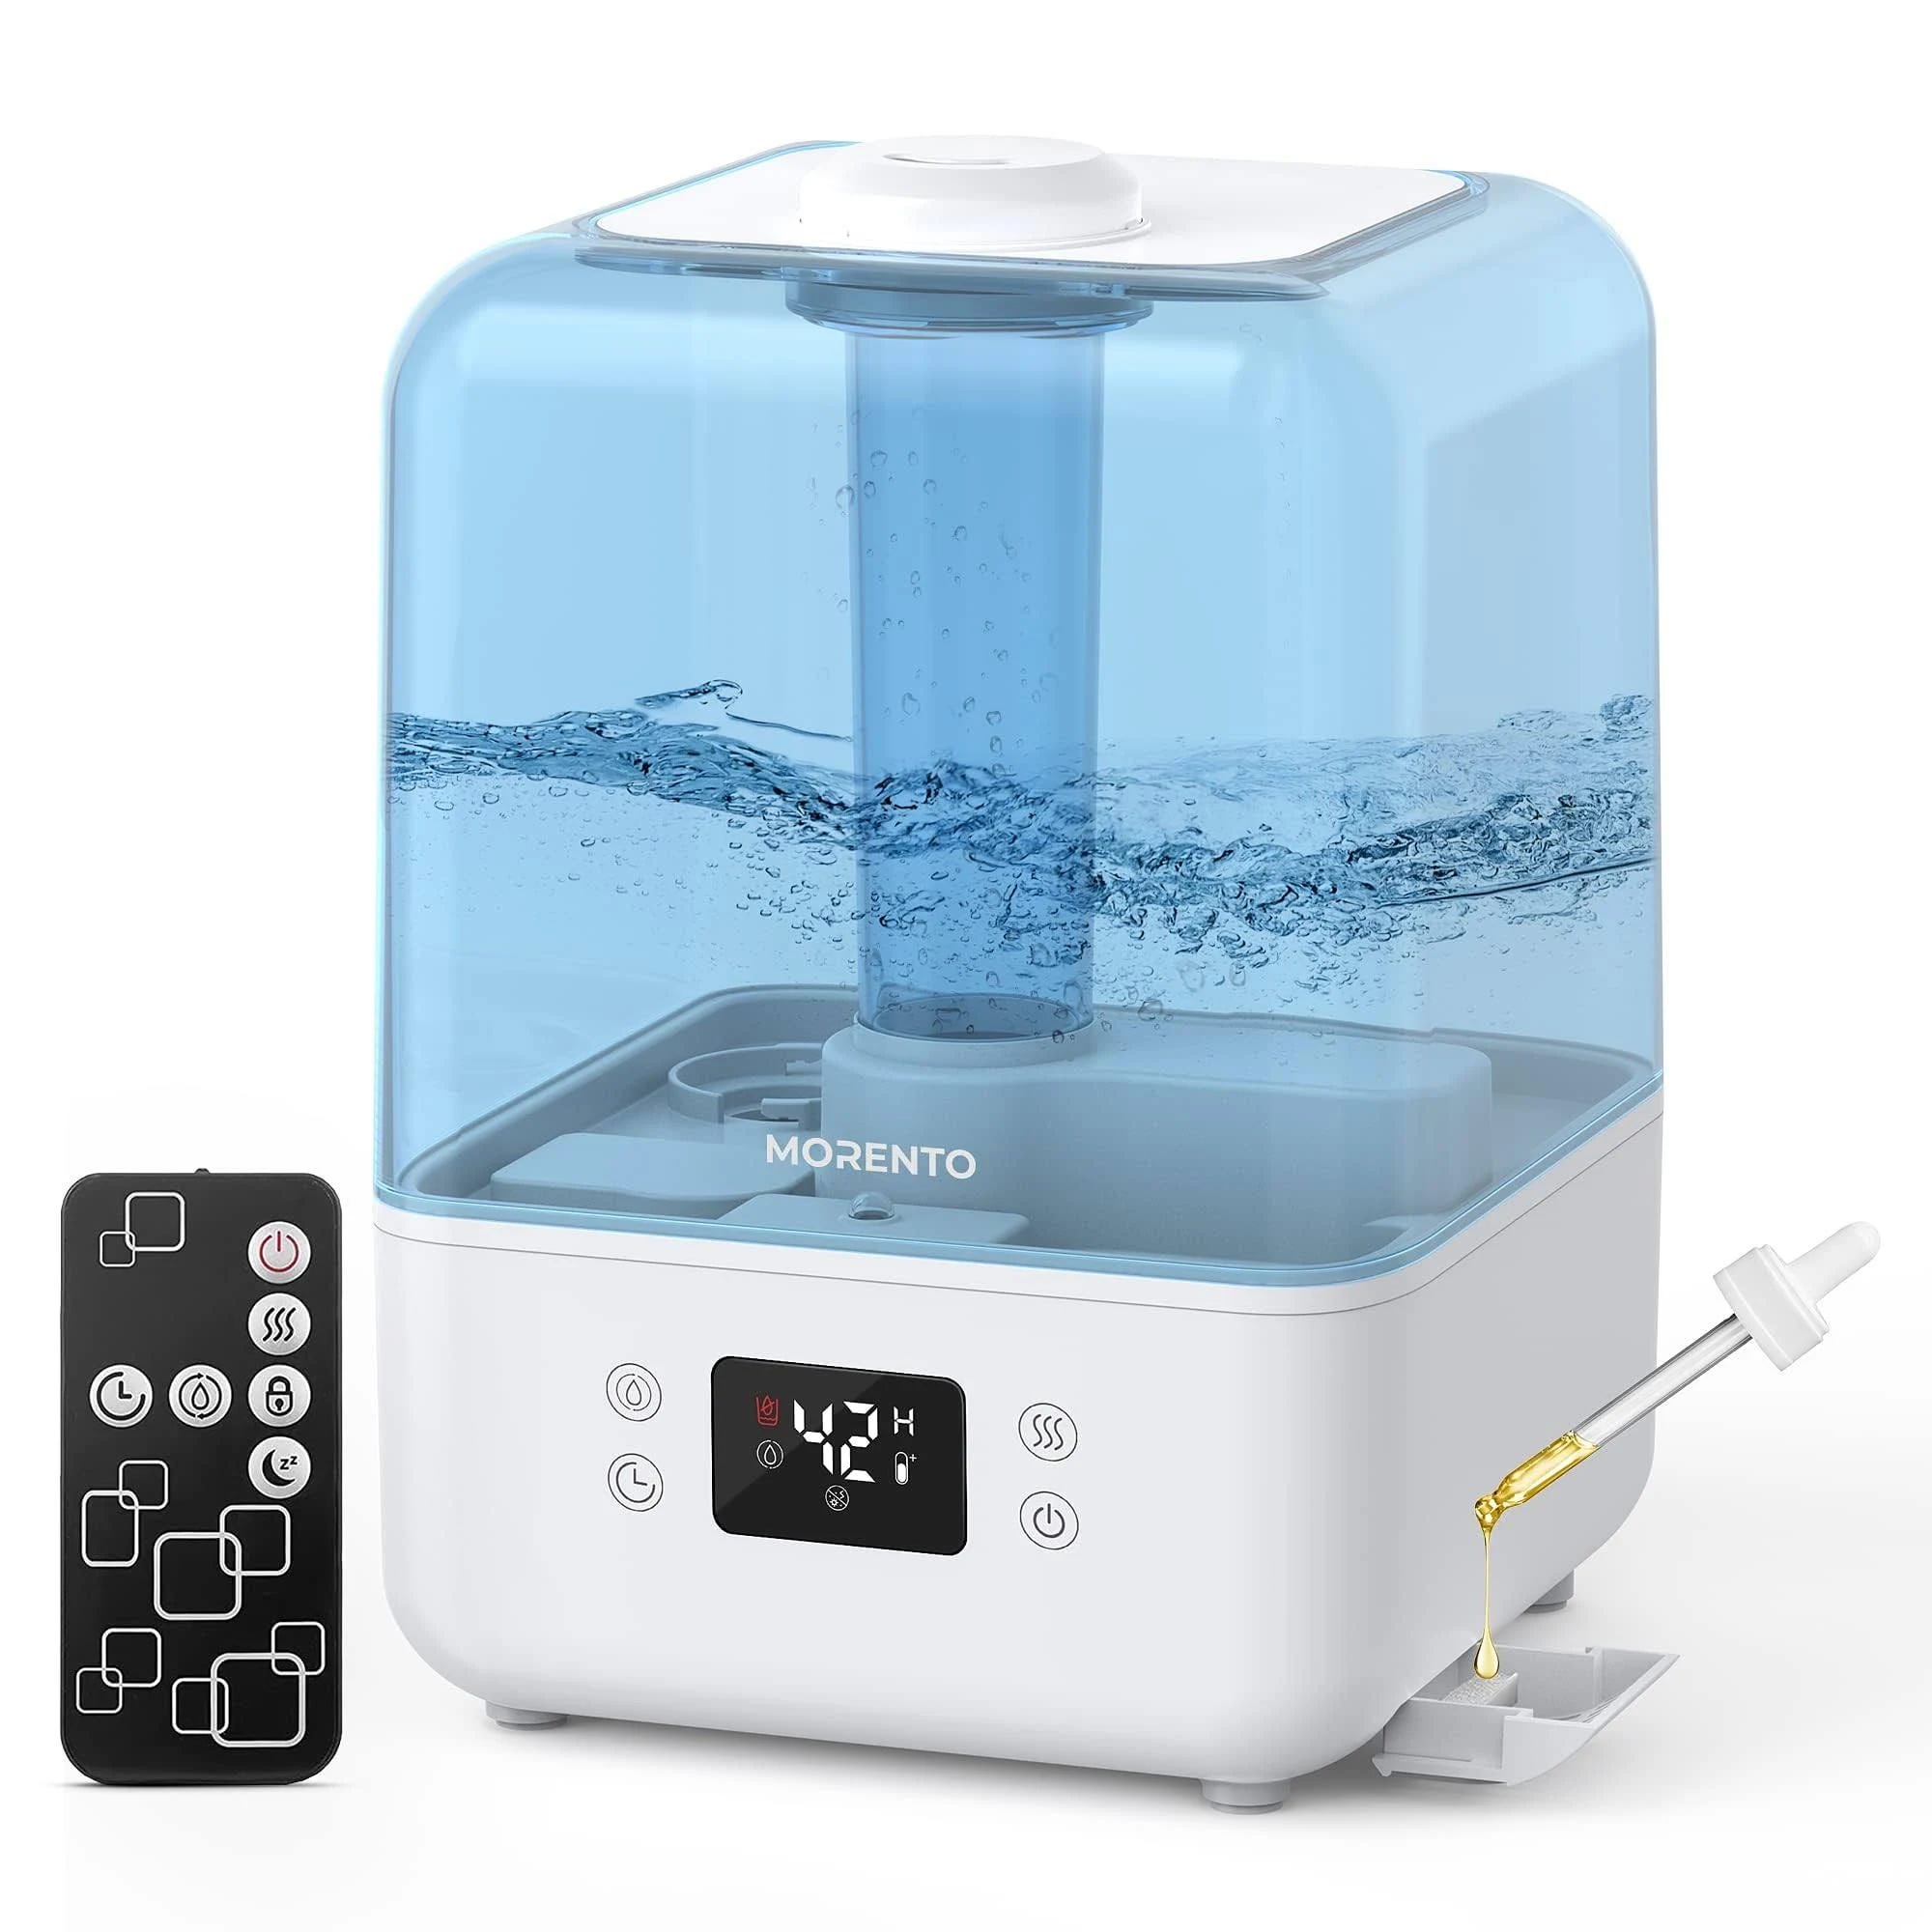 MORENTO 4.5L Large Room Cool Mist Humidifier | Image